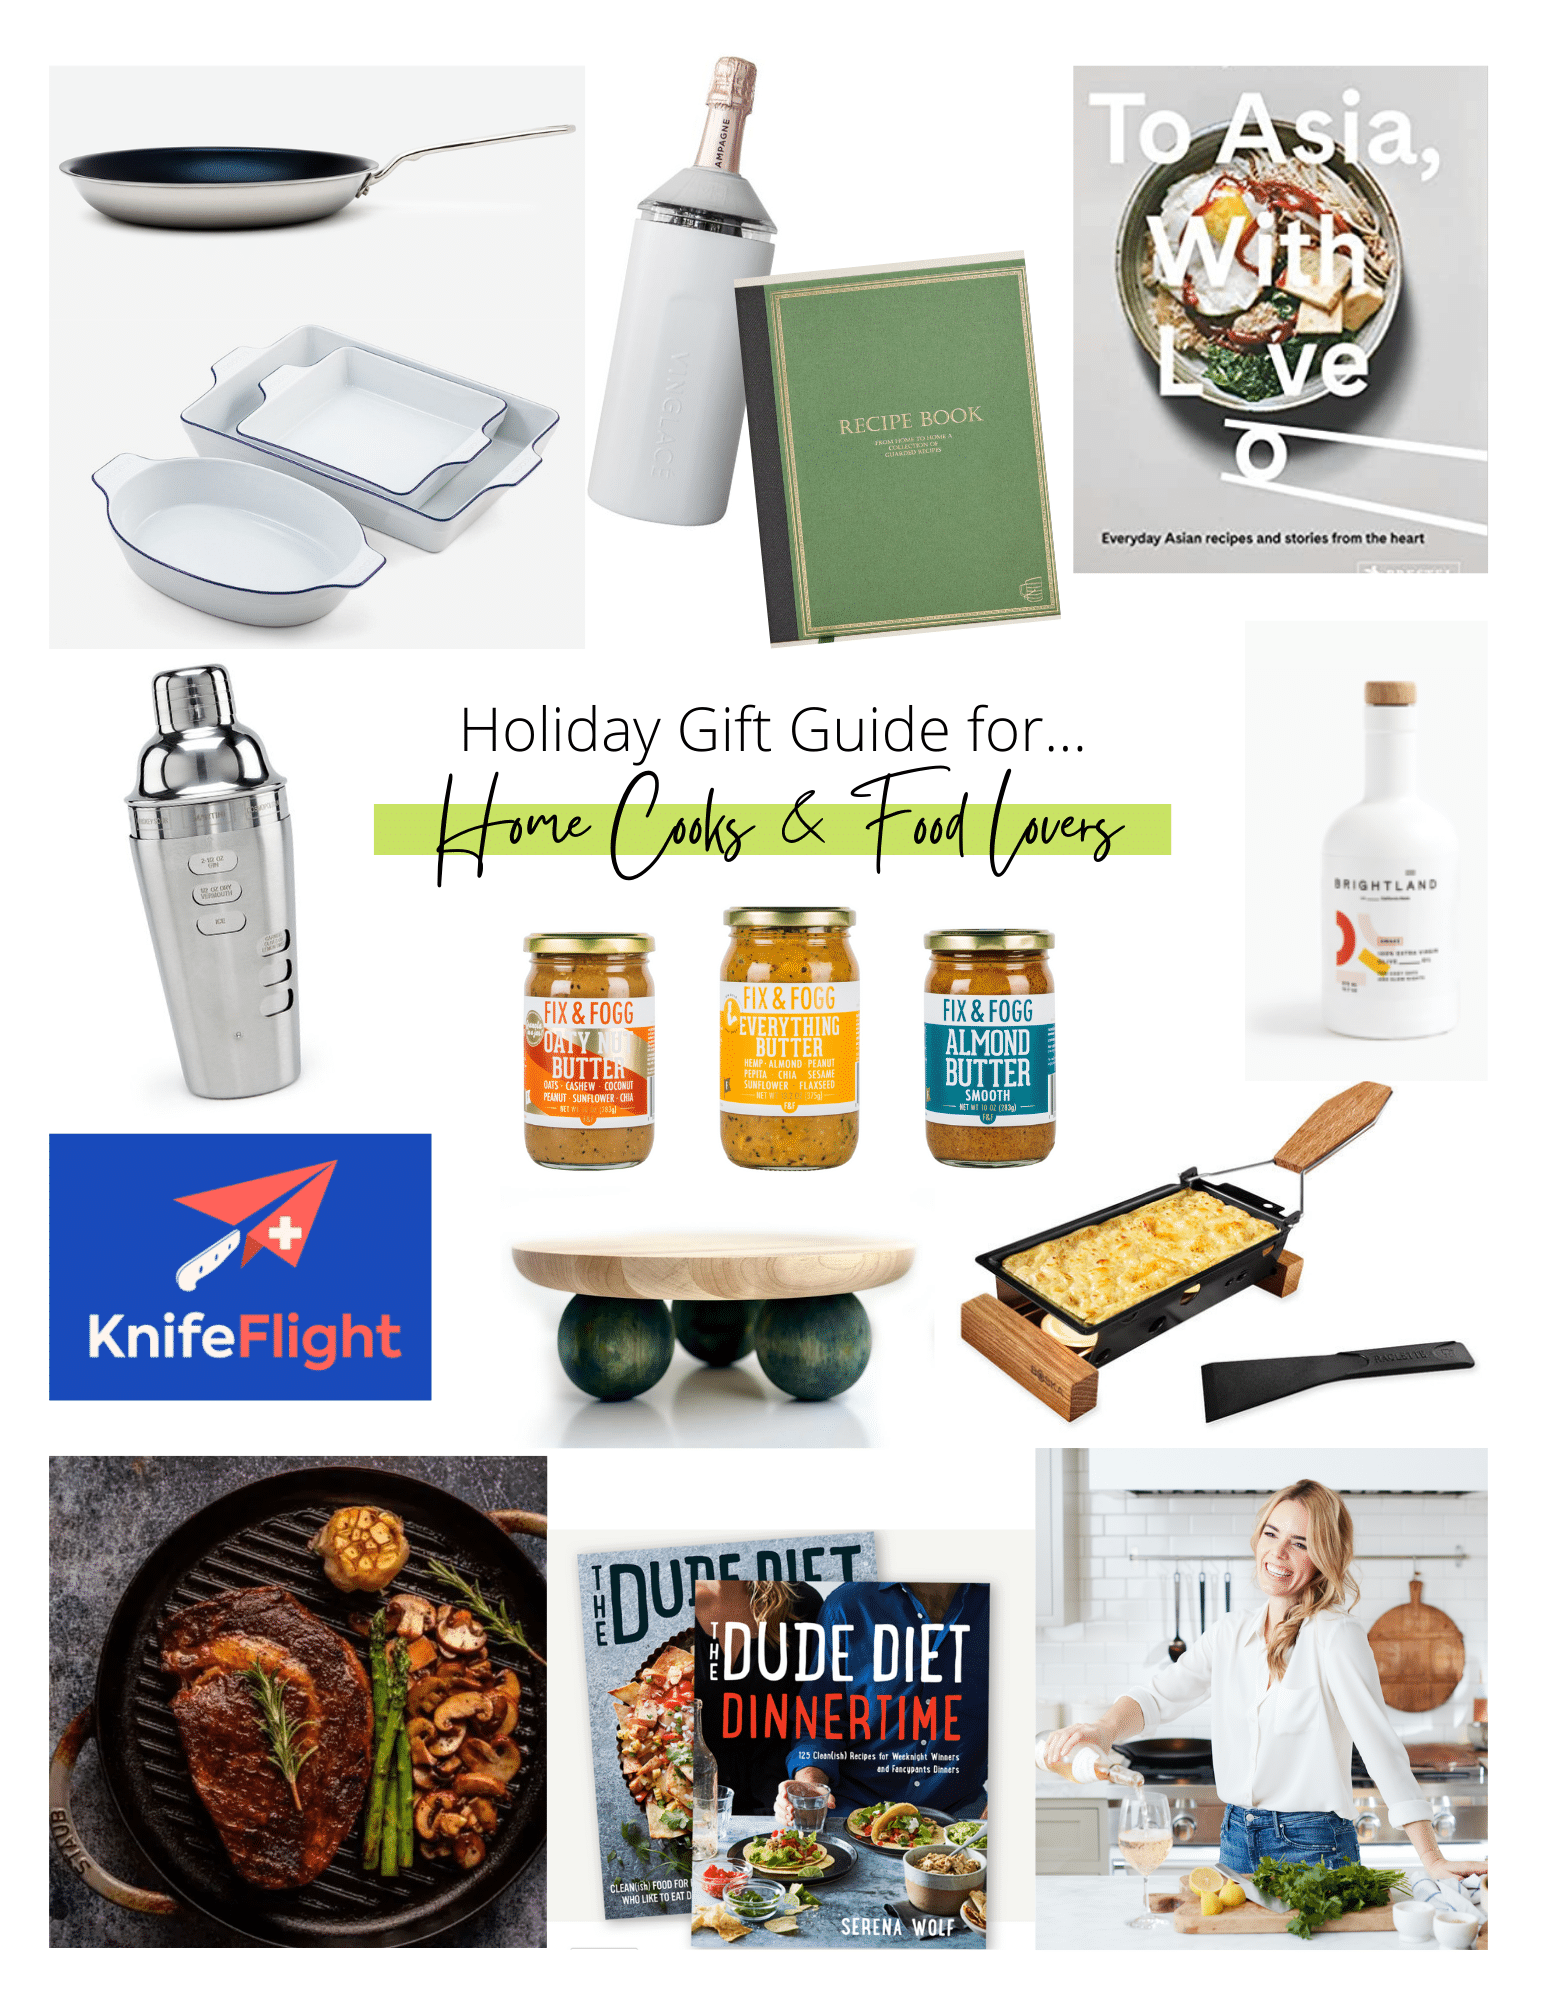 The Ultimate Guide of Gifts for Cooks